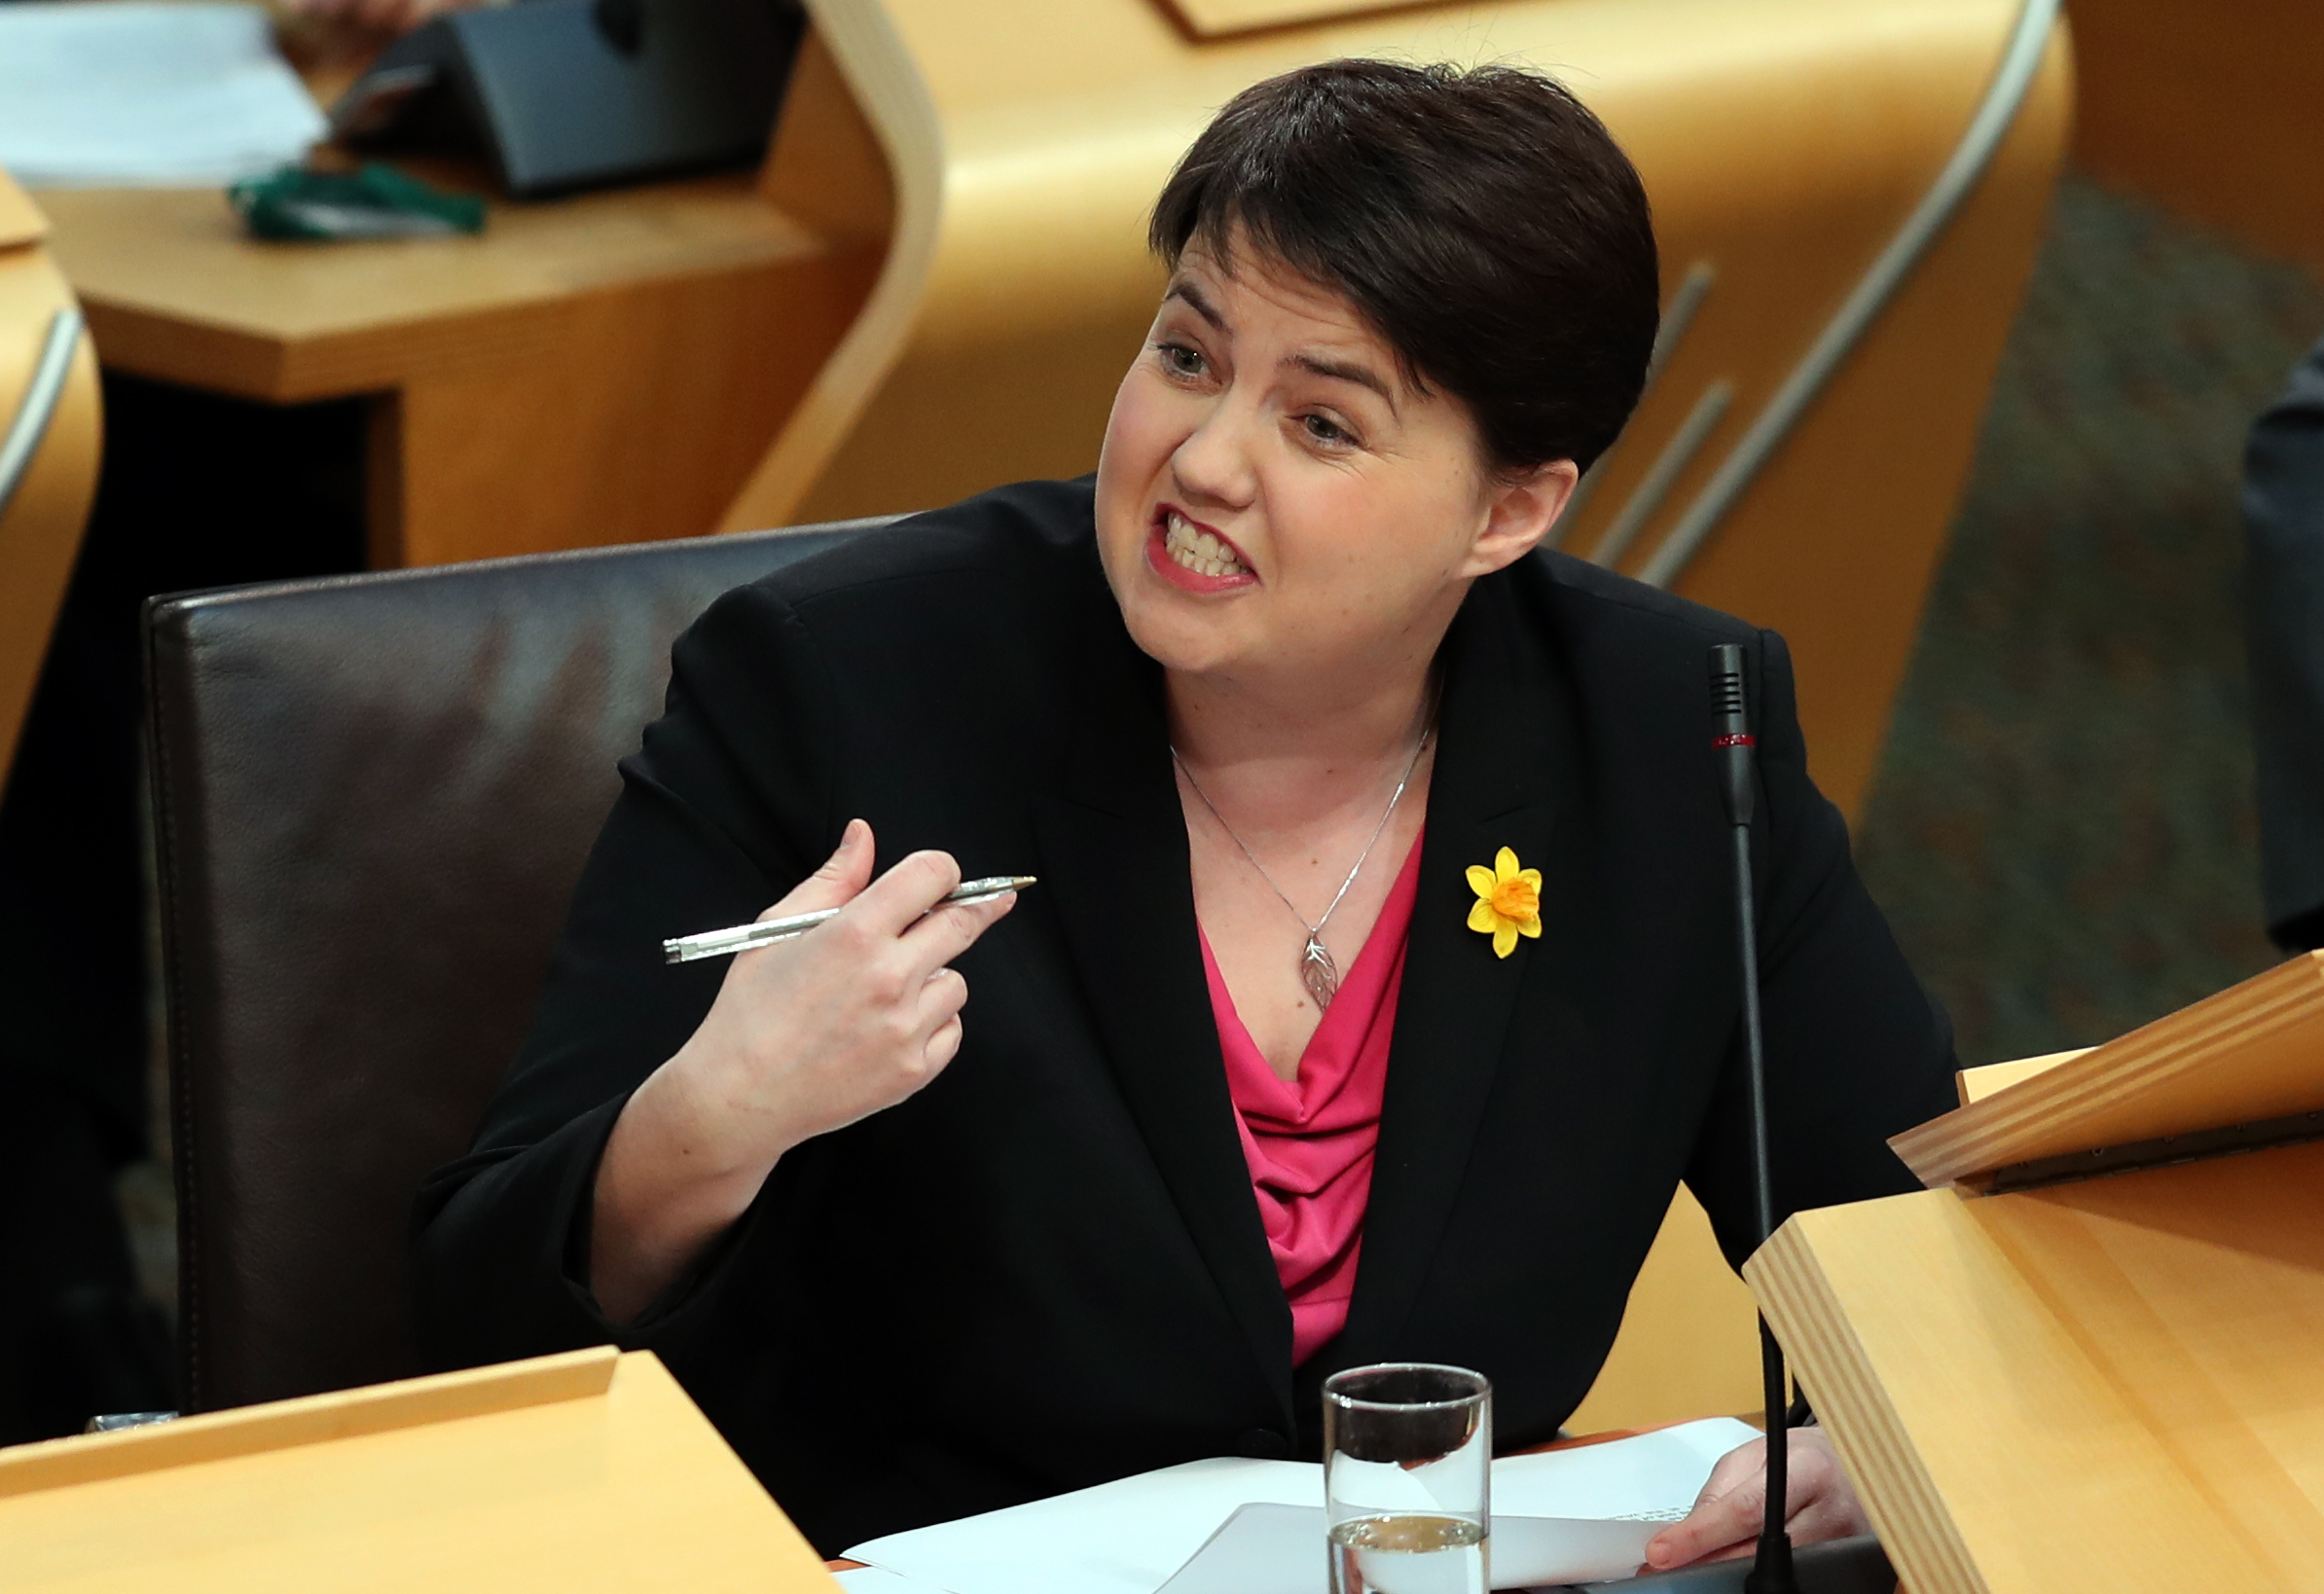 Scottish Conservative leader Ruth Davidson during First Minister's Questions at the Scottish Parliament in Edinburgh. (Jane Barlow/PA Wire)